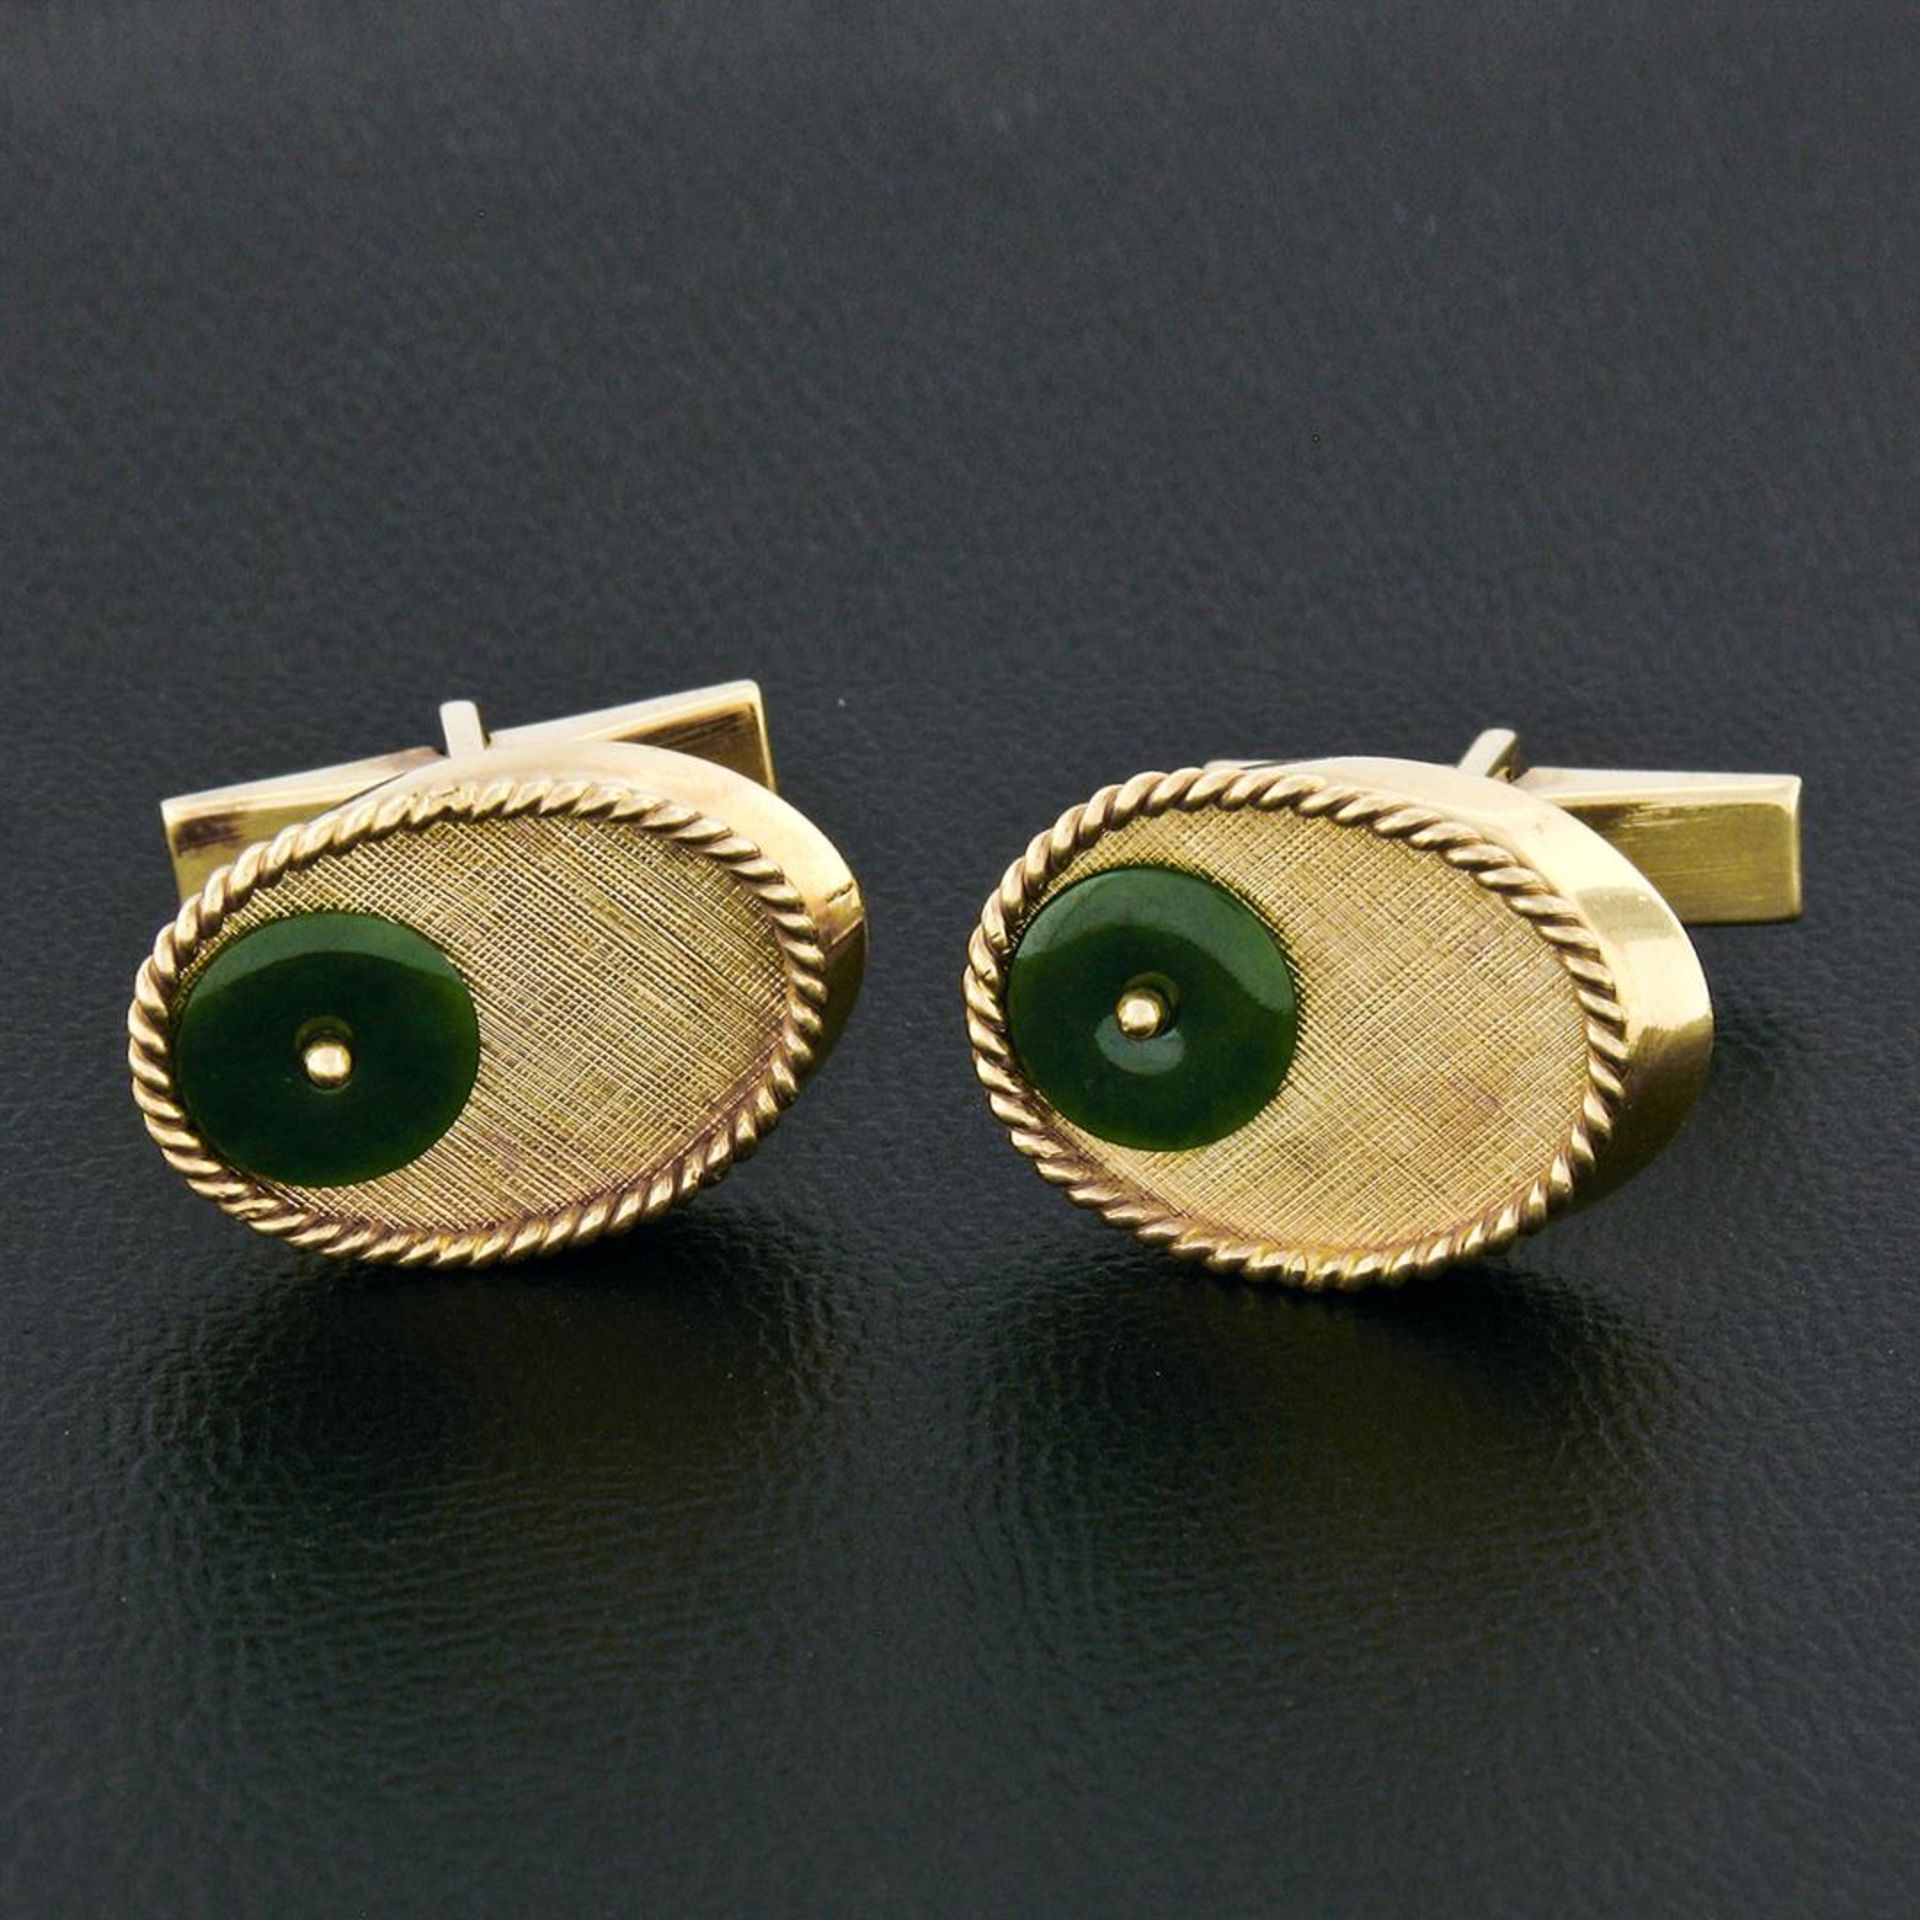 Vintage Men's 14K Yellow Gold Jade Disc Oval Florentine Twisted Wire Cufflinks - Image 2 of 6